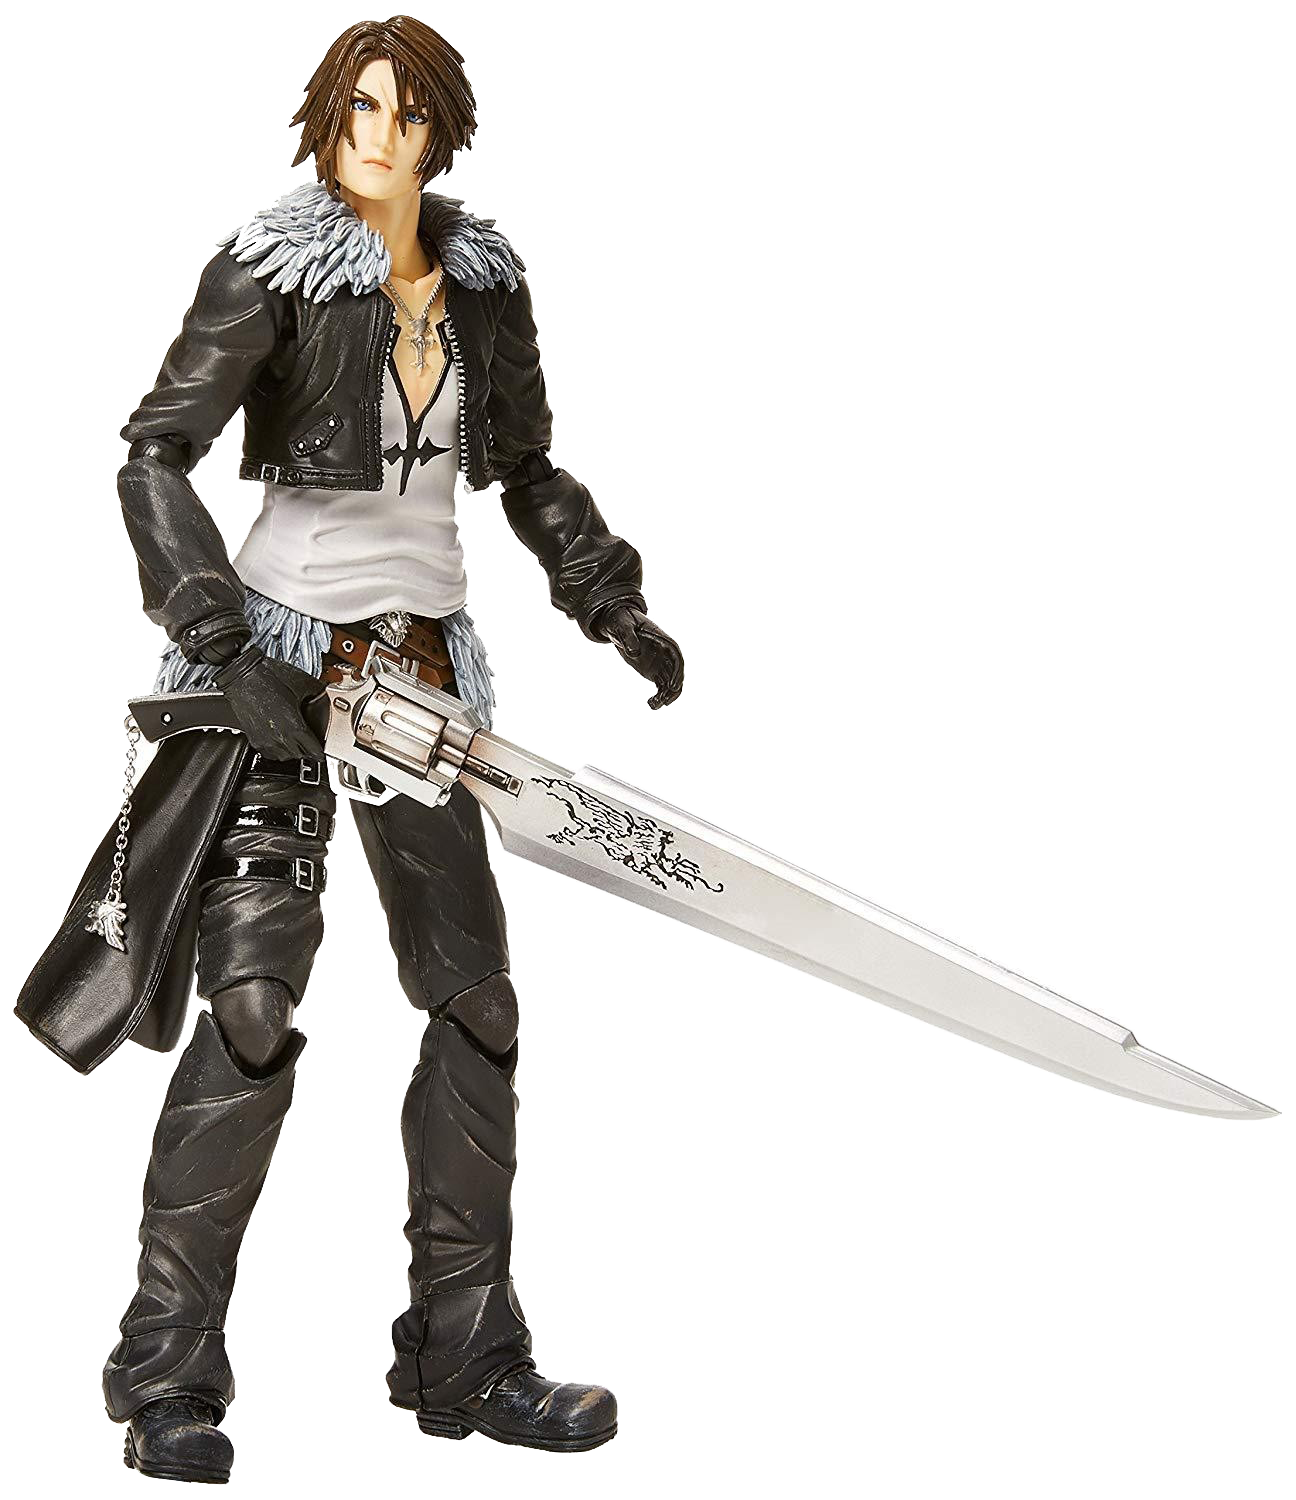 Download PNG image - Squall Leonhart PNG Background Image 